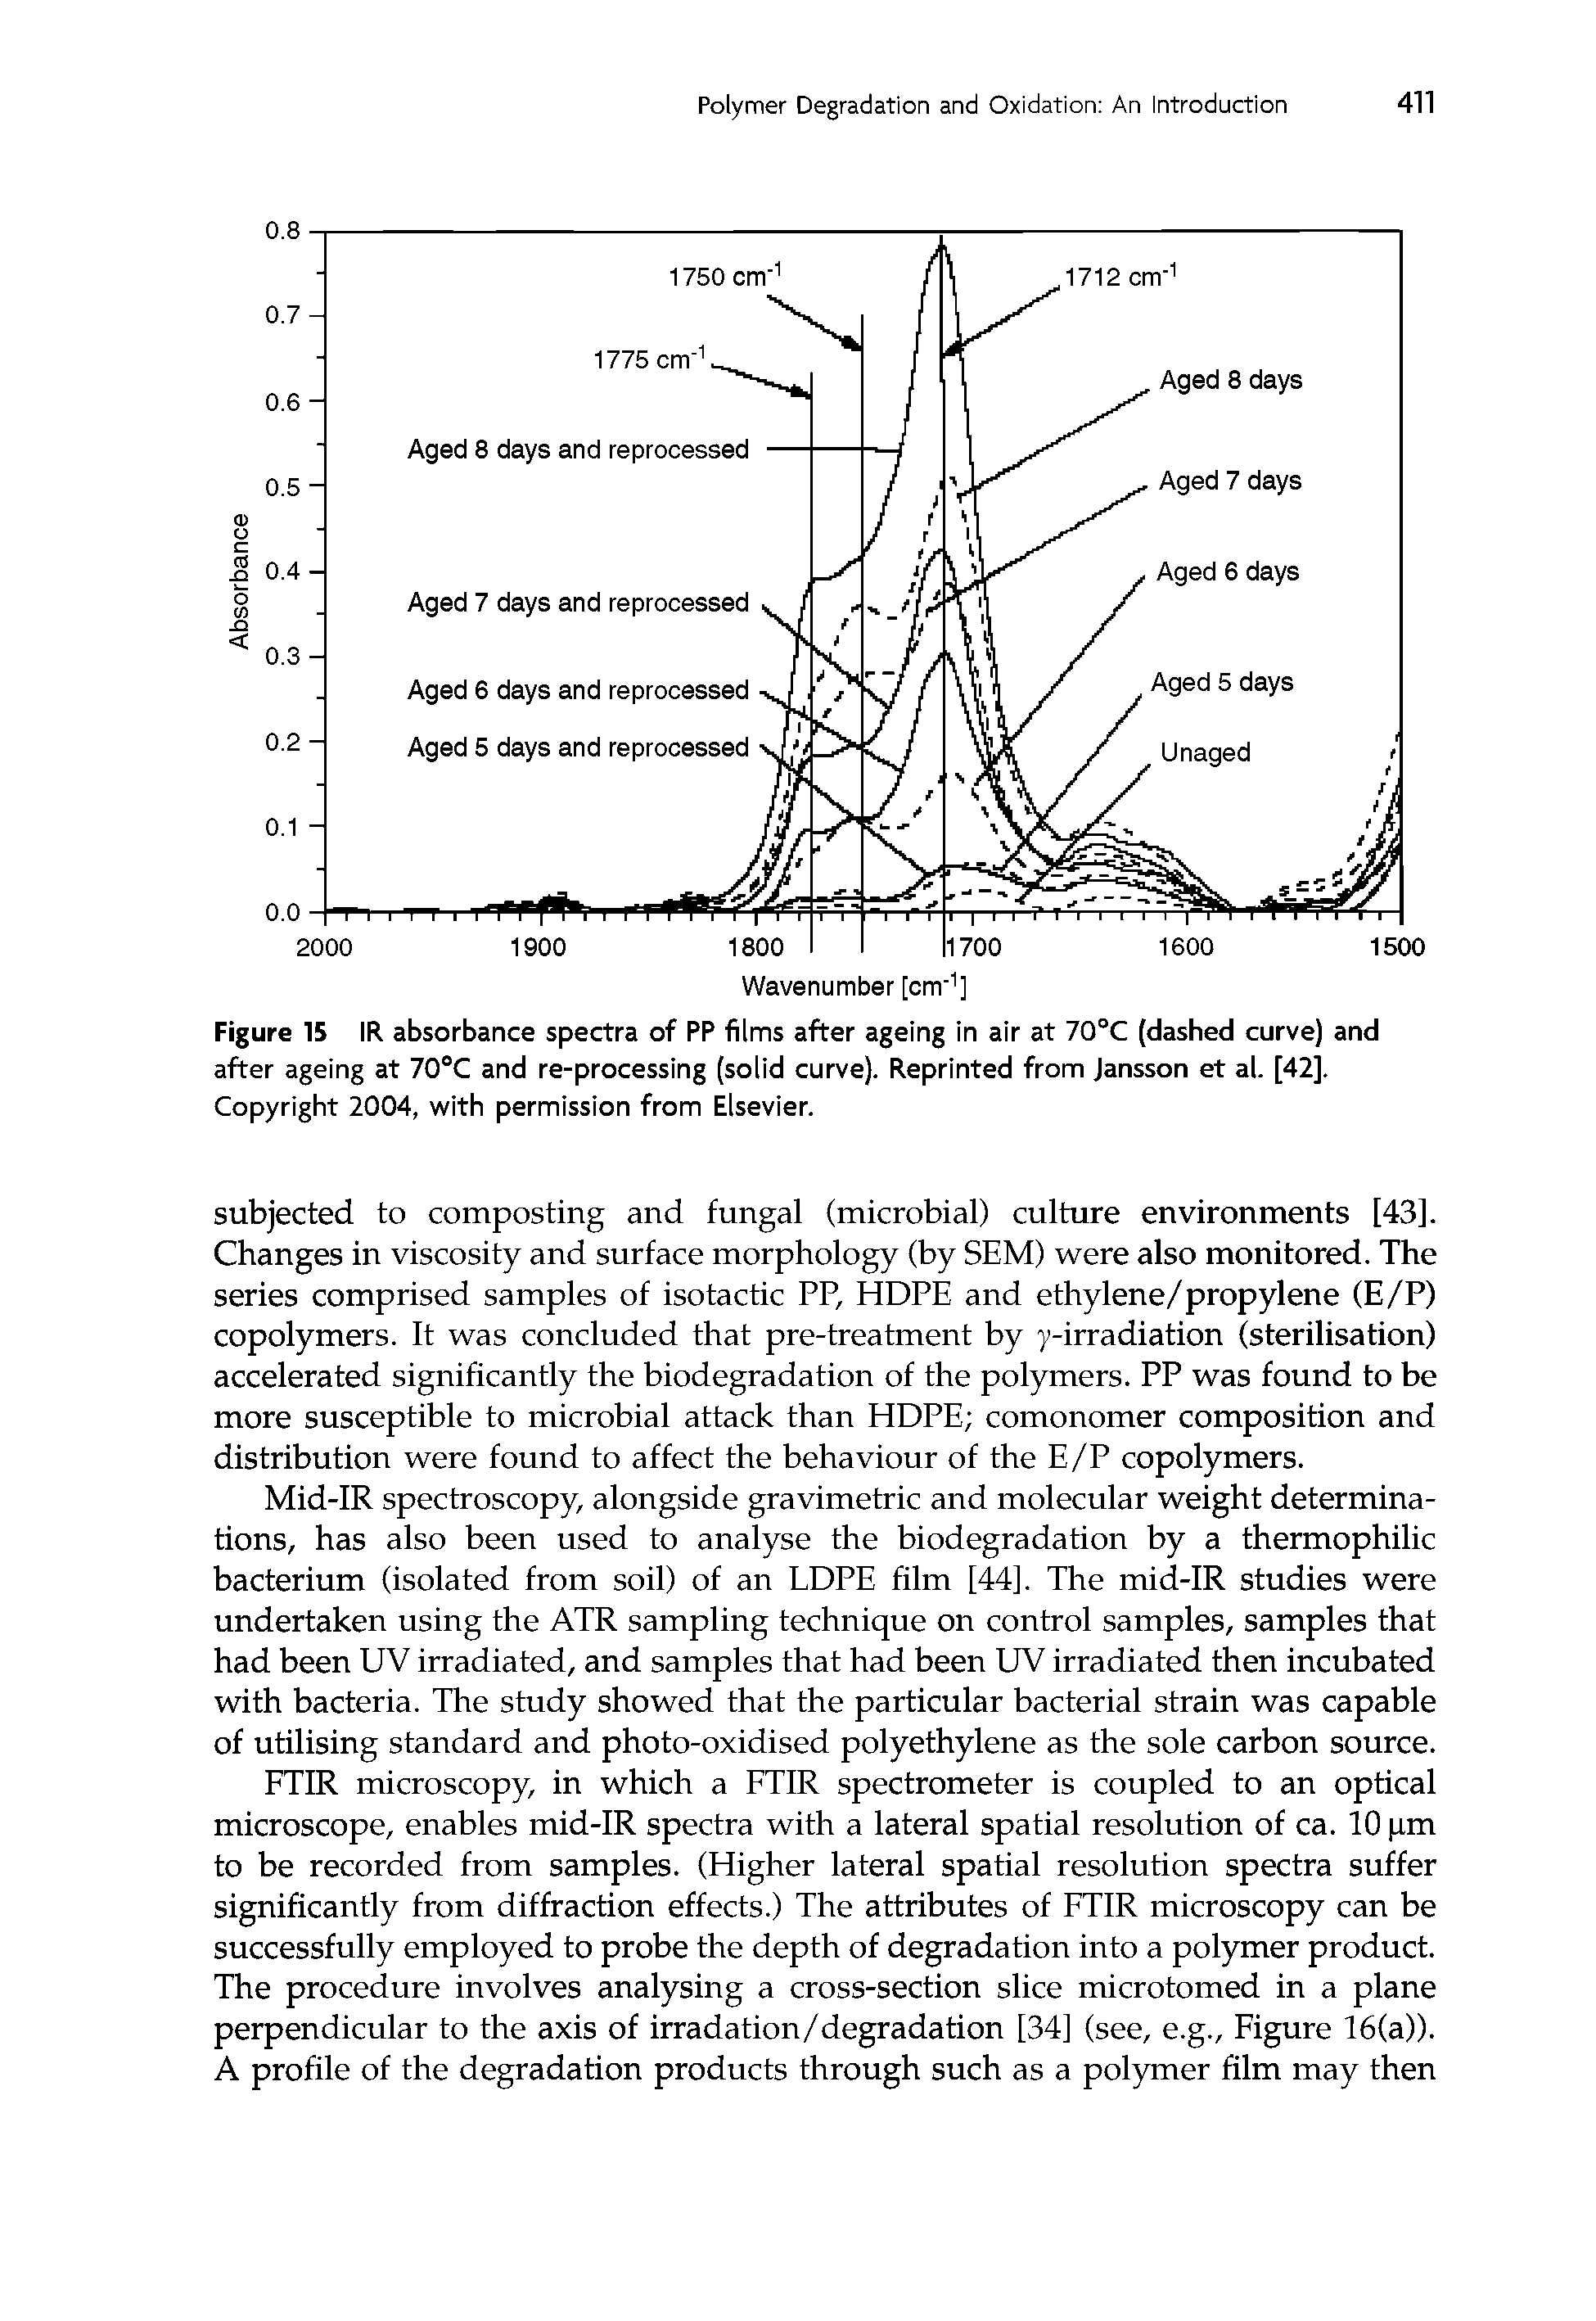 Figure 15 IR absorbance spectra of PP films after ageing in air at 70°C (dashed curve) and after ageing at 70°C and re-processing (solid curve). Reprinted from Jansson et al. [42]. Copyright 2004, with permission from Elsevier.